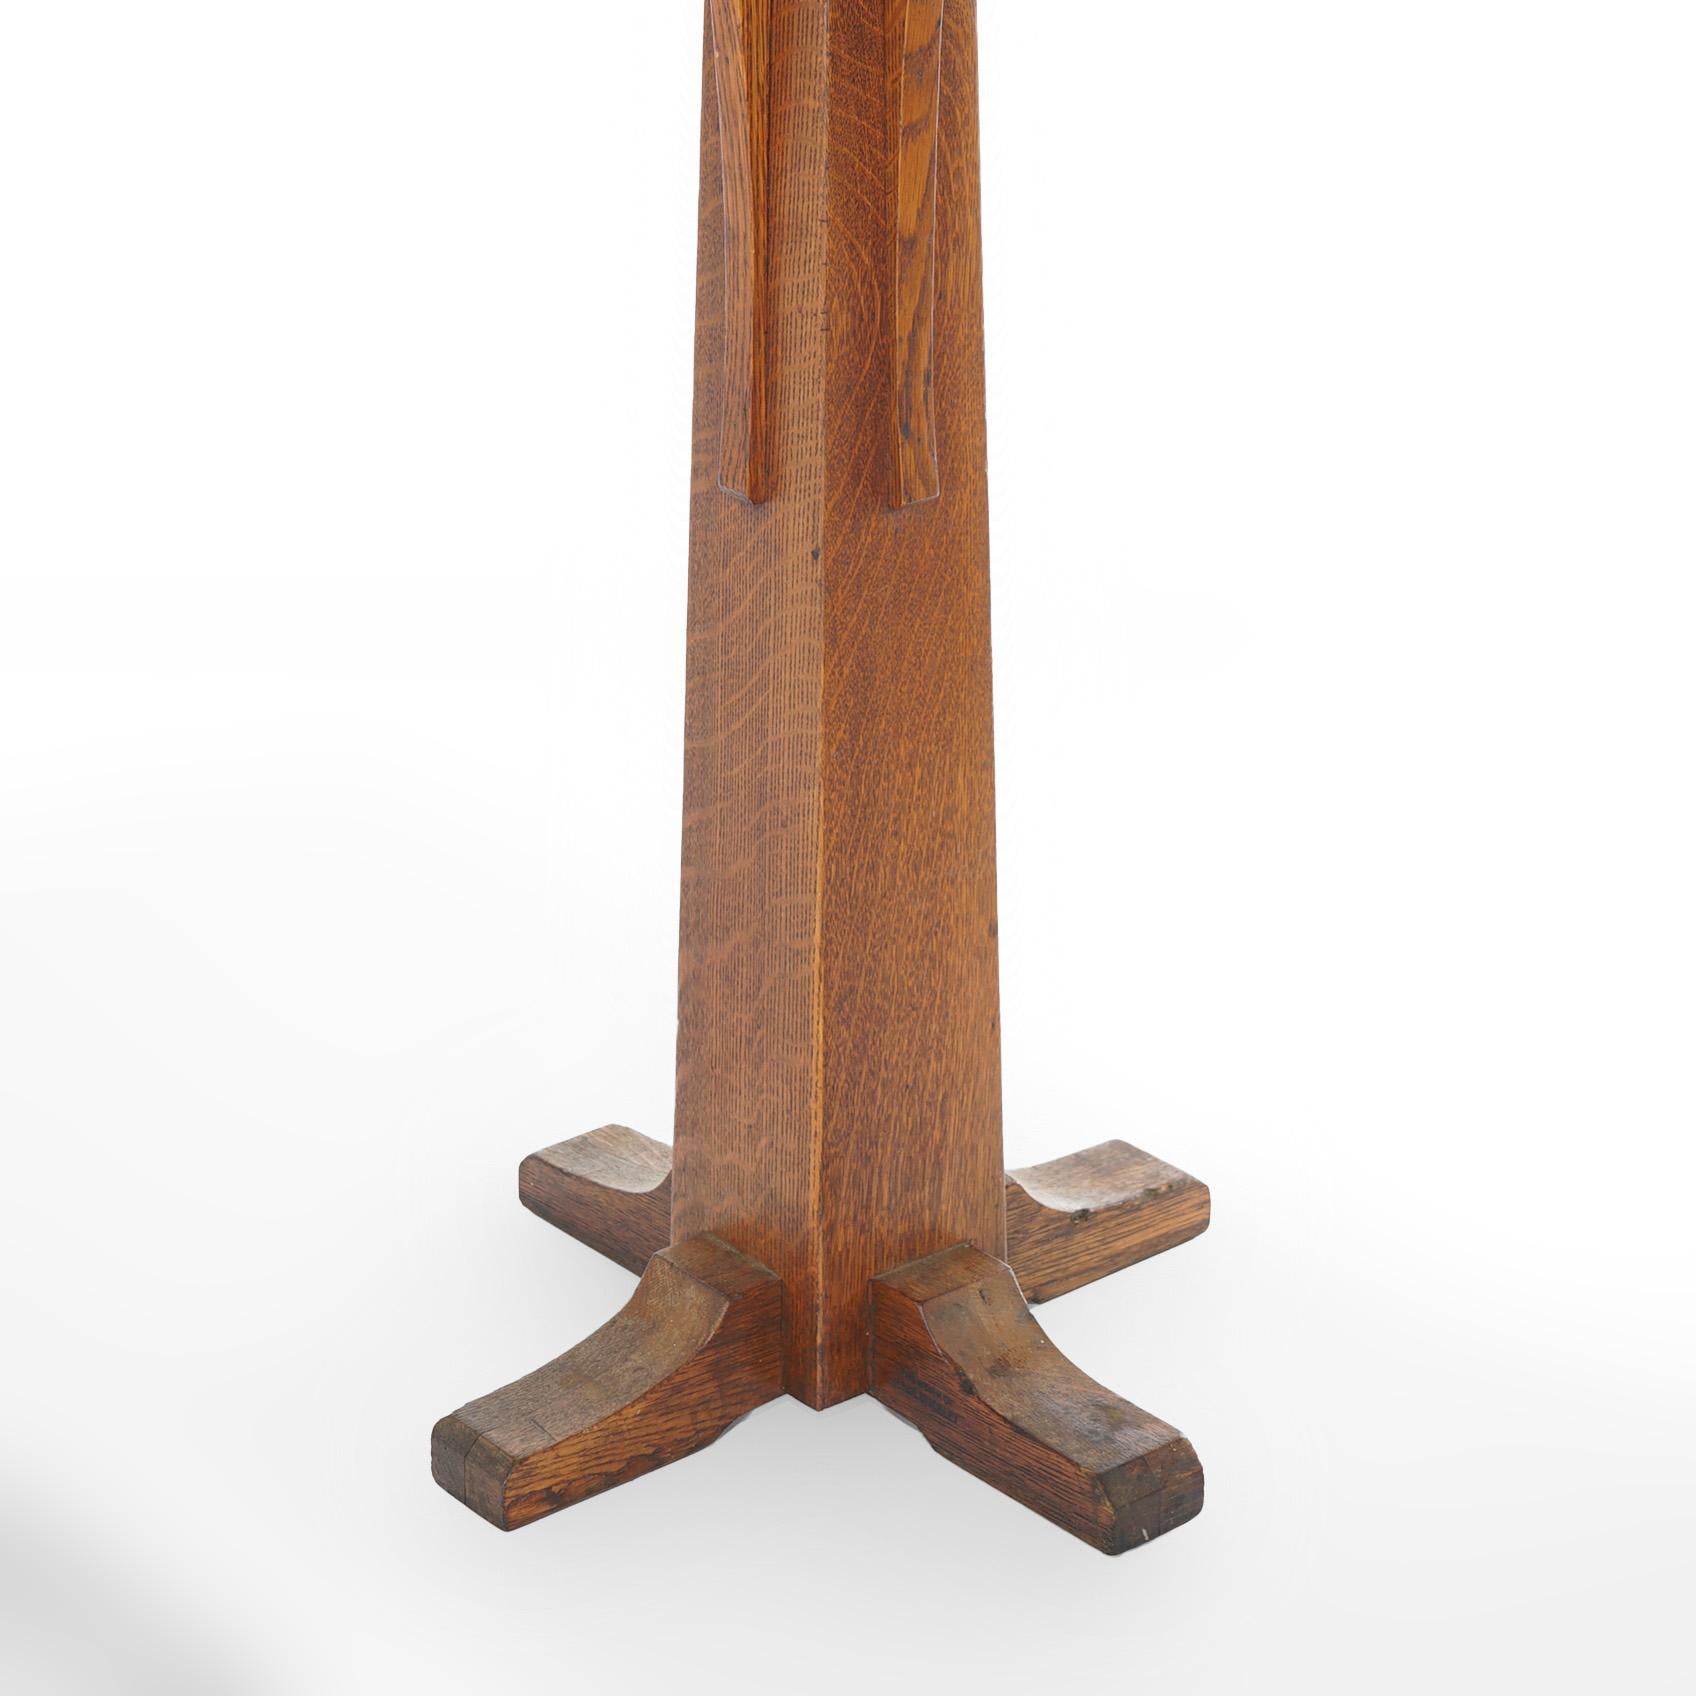 20th Century Antique Arts & Crafts L&JG Stickley Branded Oak Plant Stand With Shoe Feet c1910